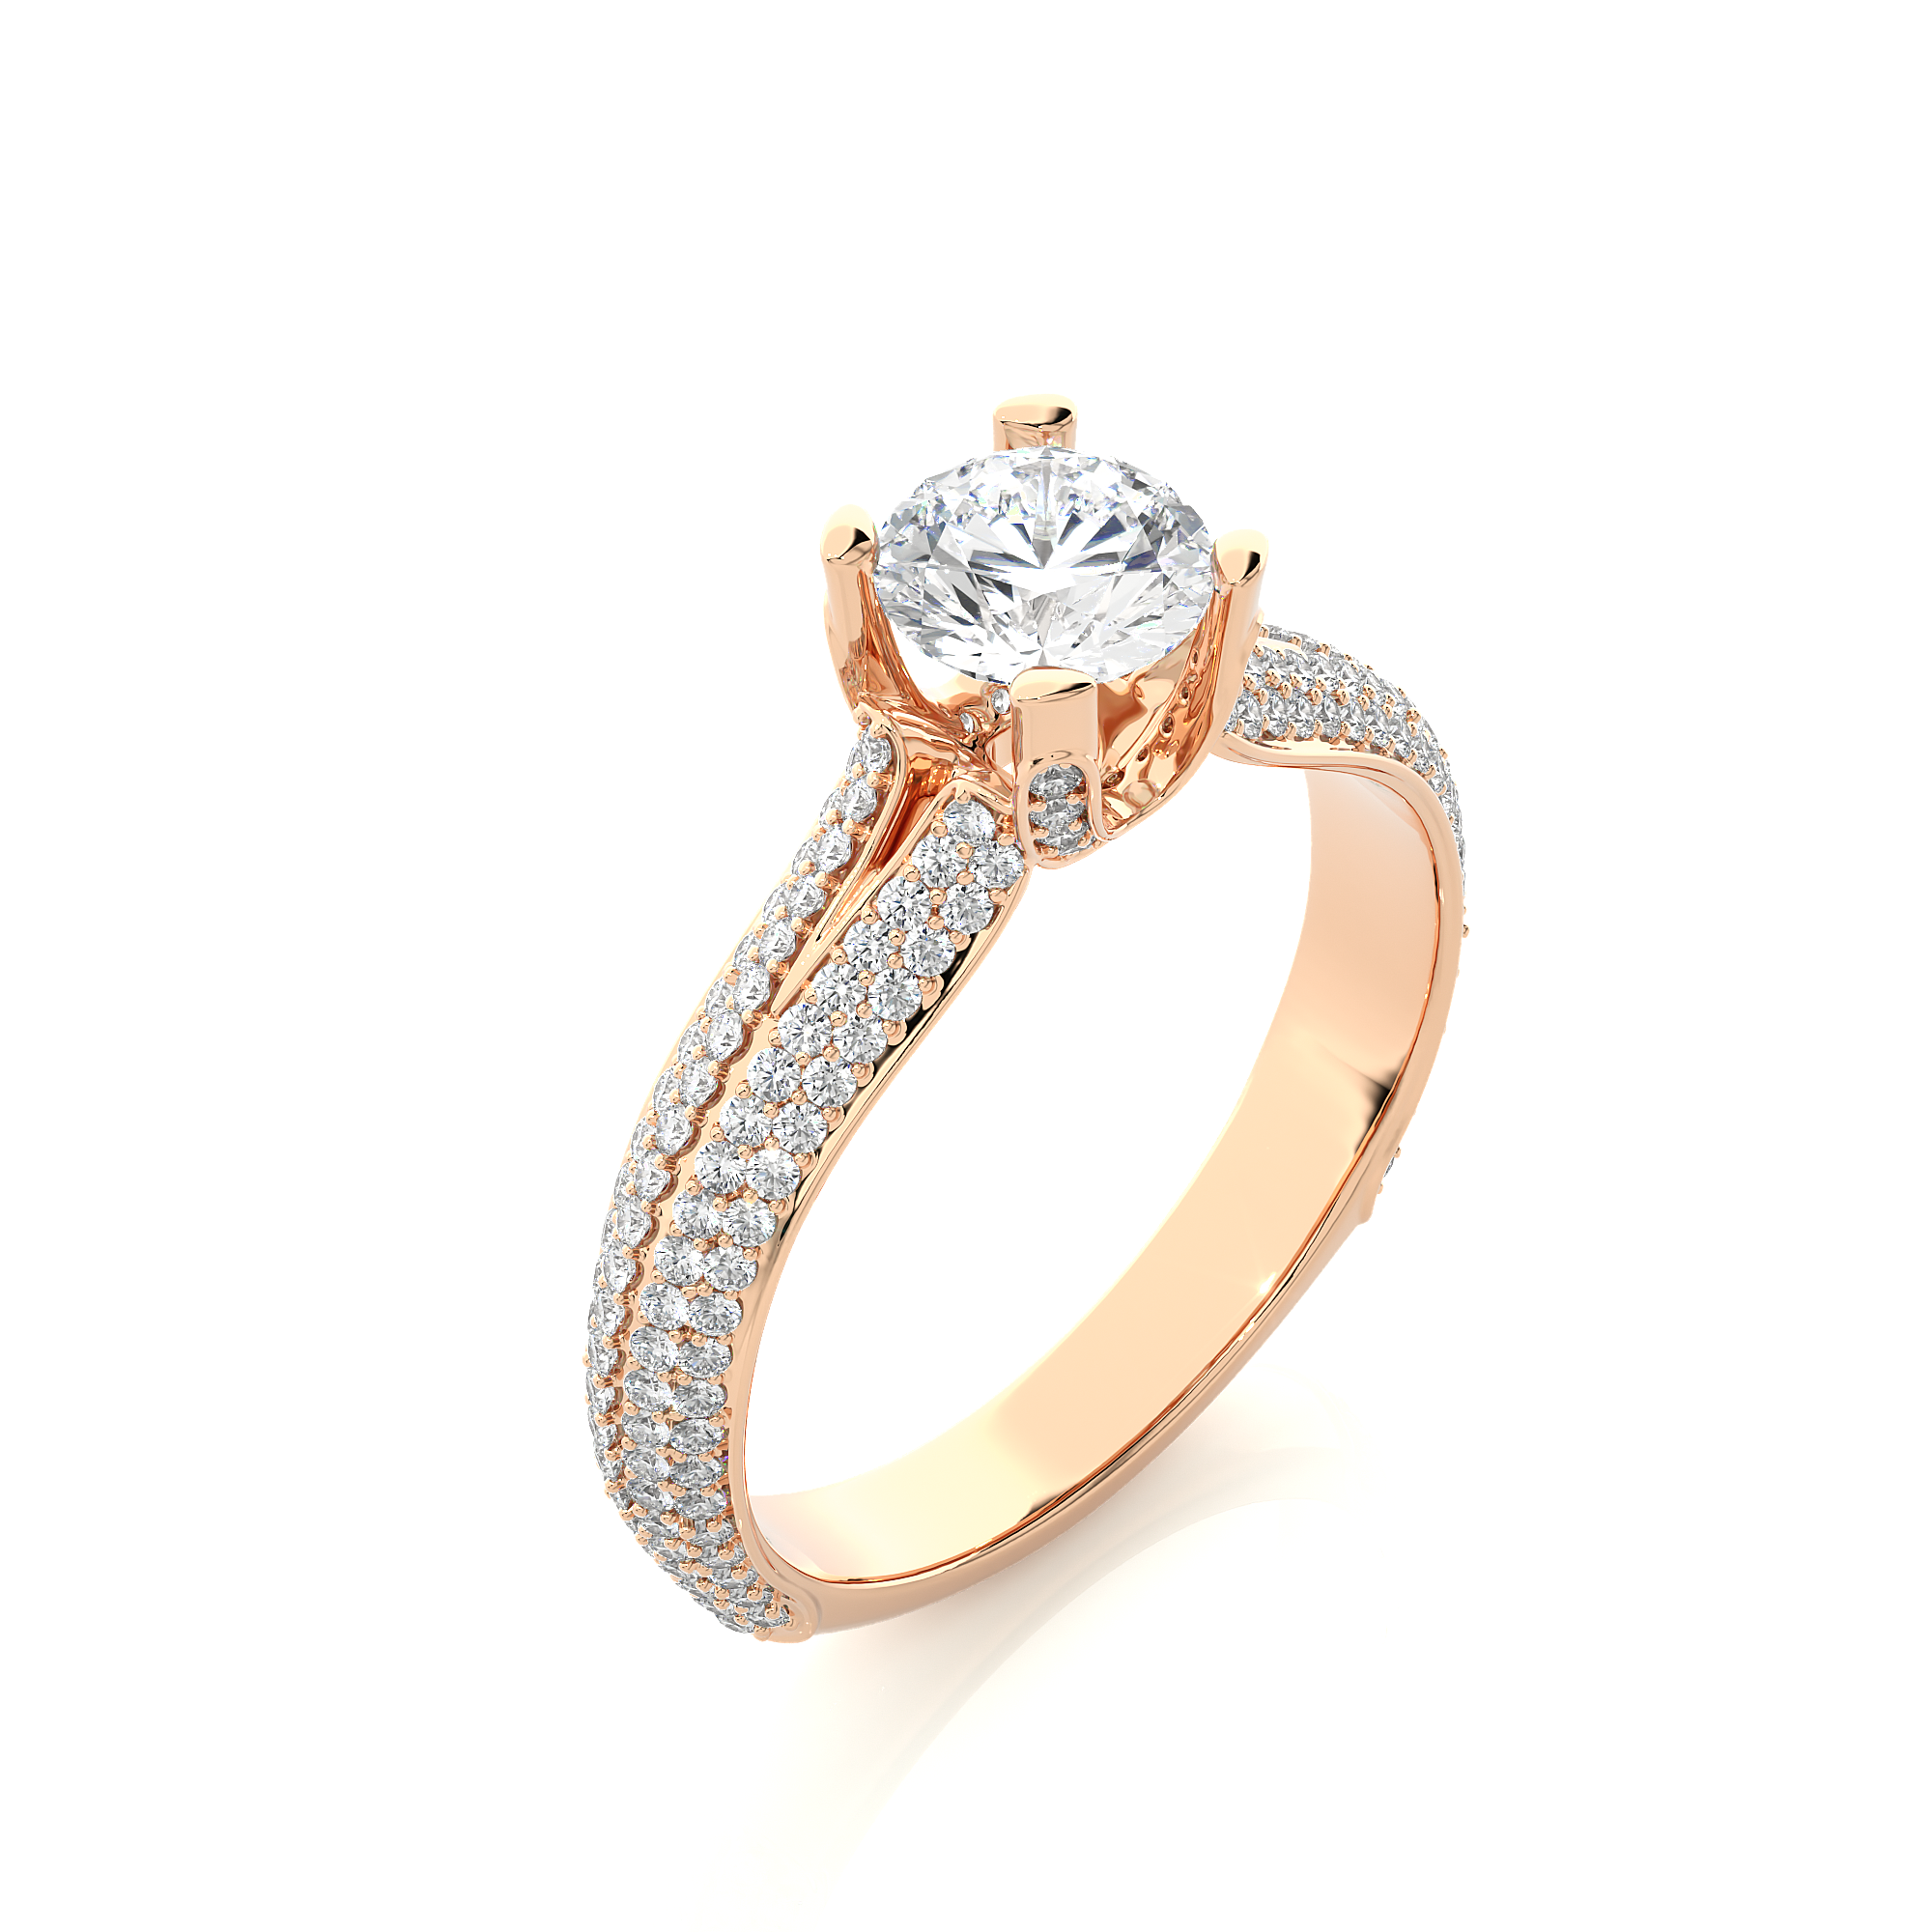 Crystal Crest Solitaire Lab Grown Diamond Ring